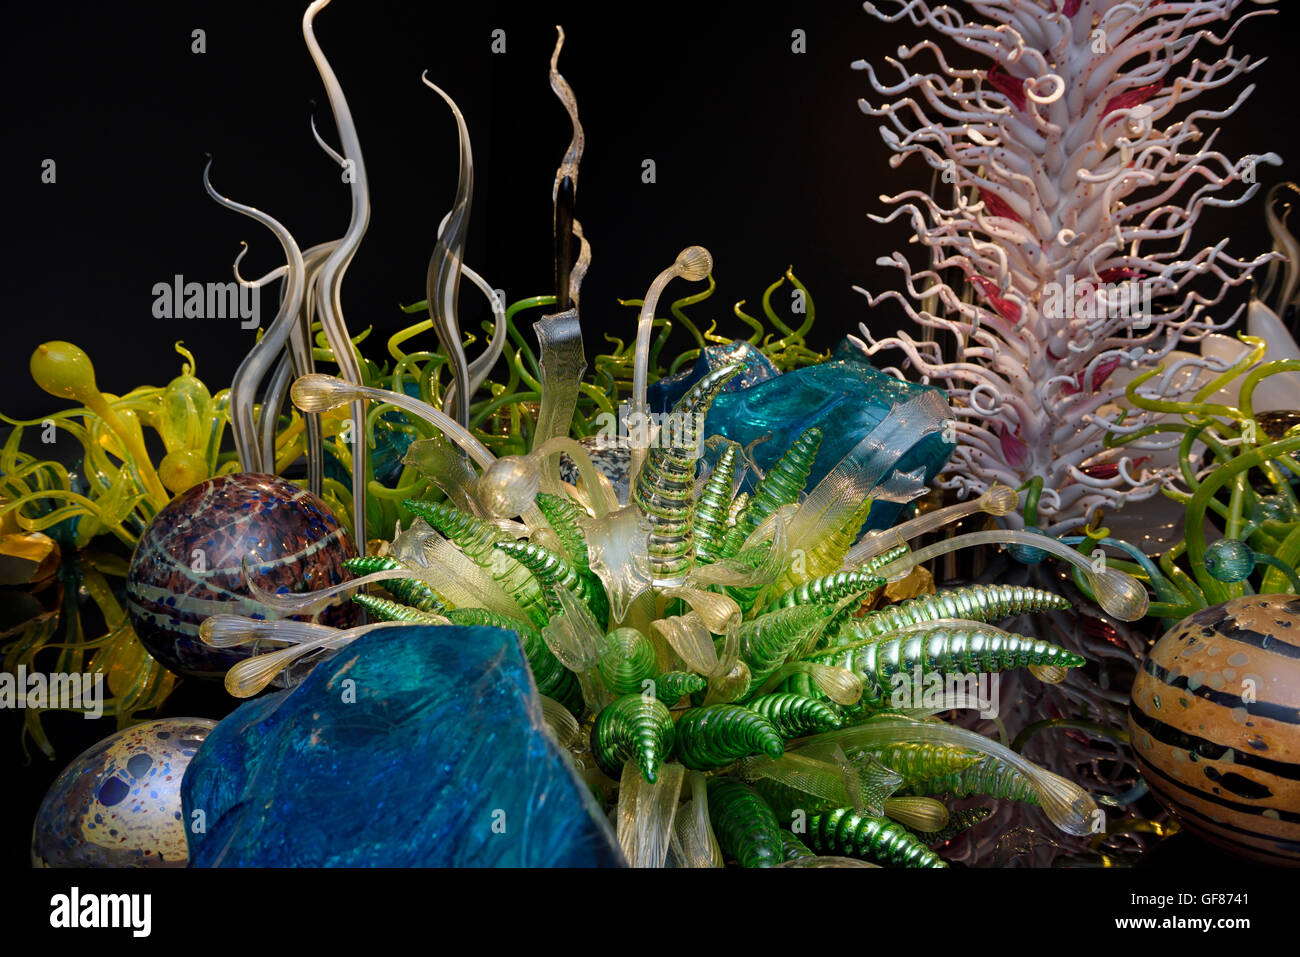 Underwater world fantasy of glass by Dale Chihuly ROM Toronto Stock Photo